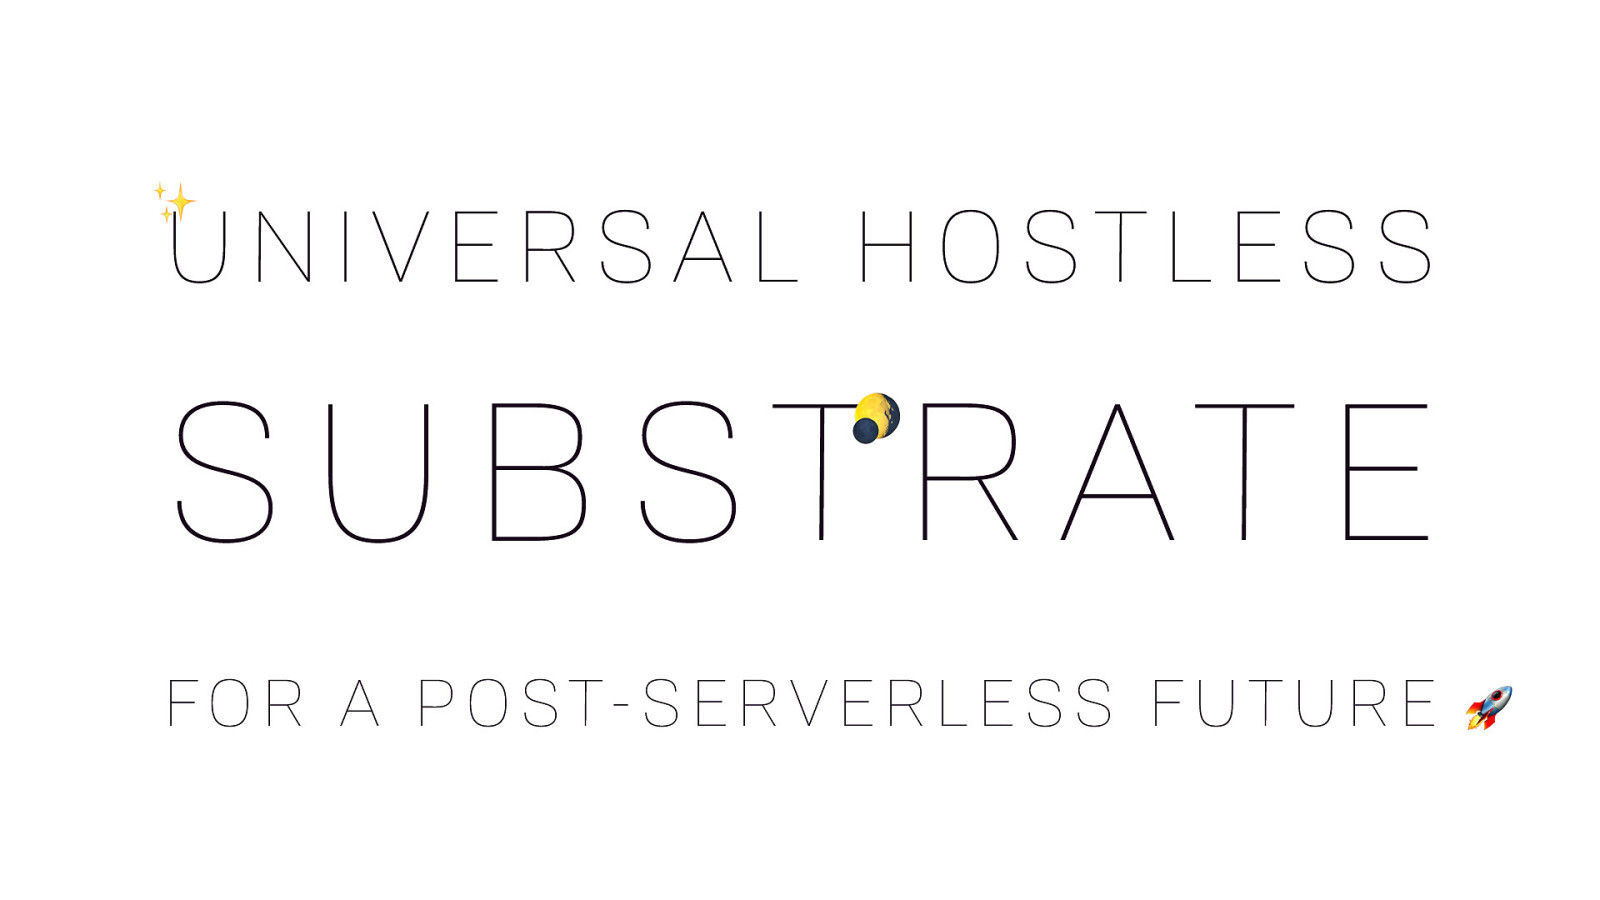 Calagry Edition — Universal Hostless Substrate for a Post-Servless Future